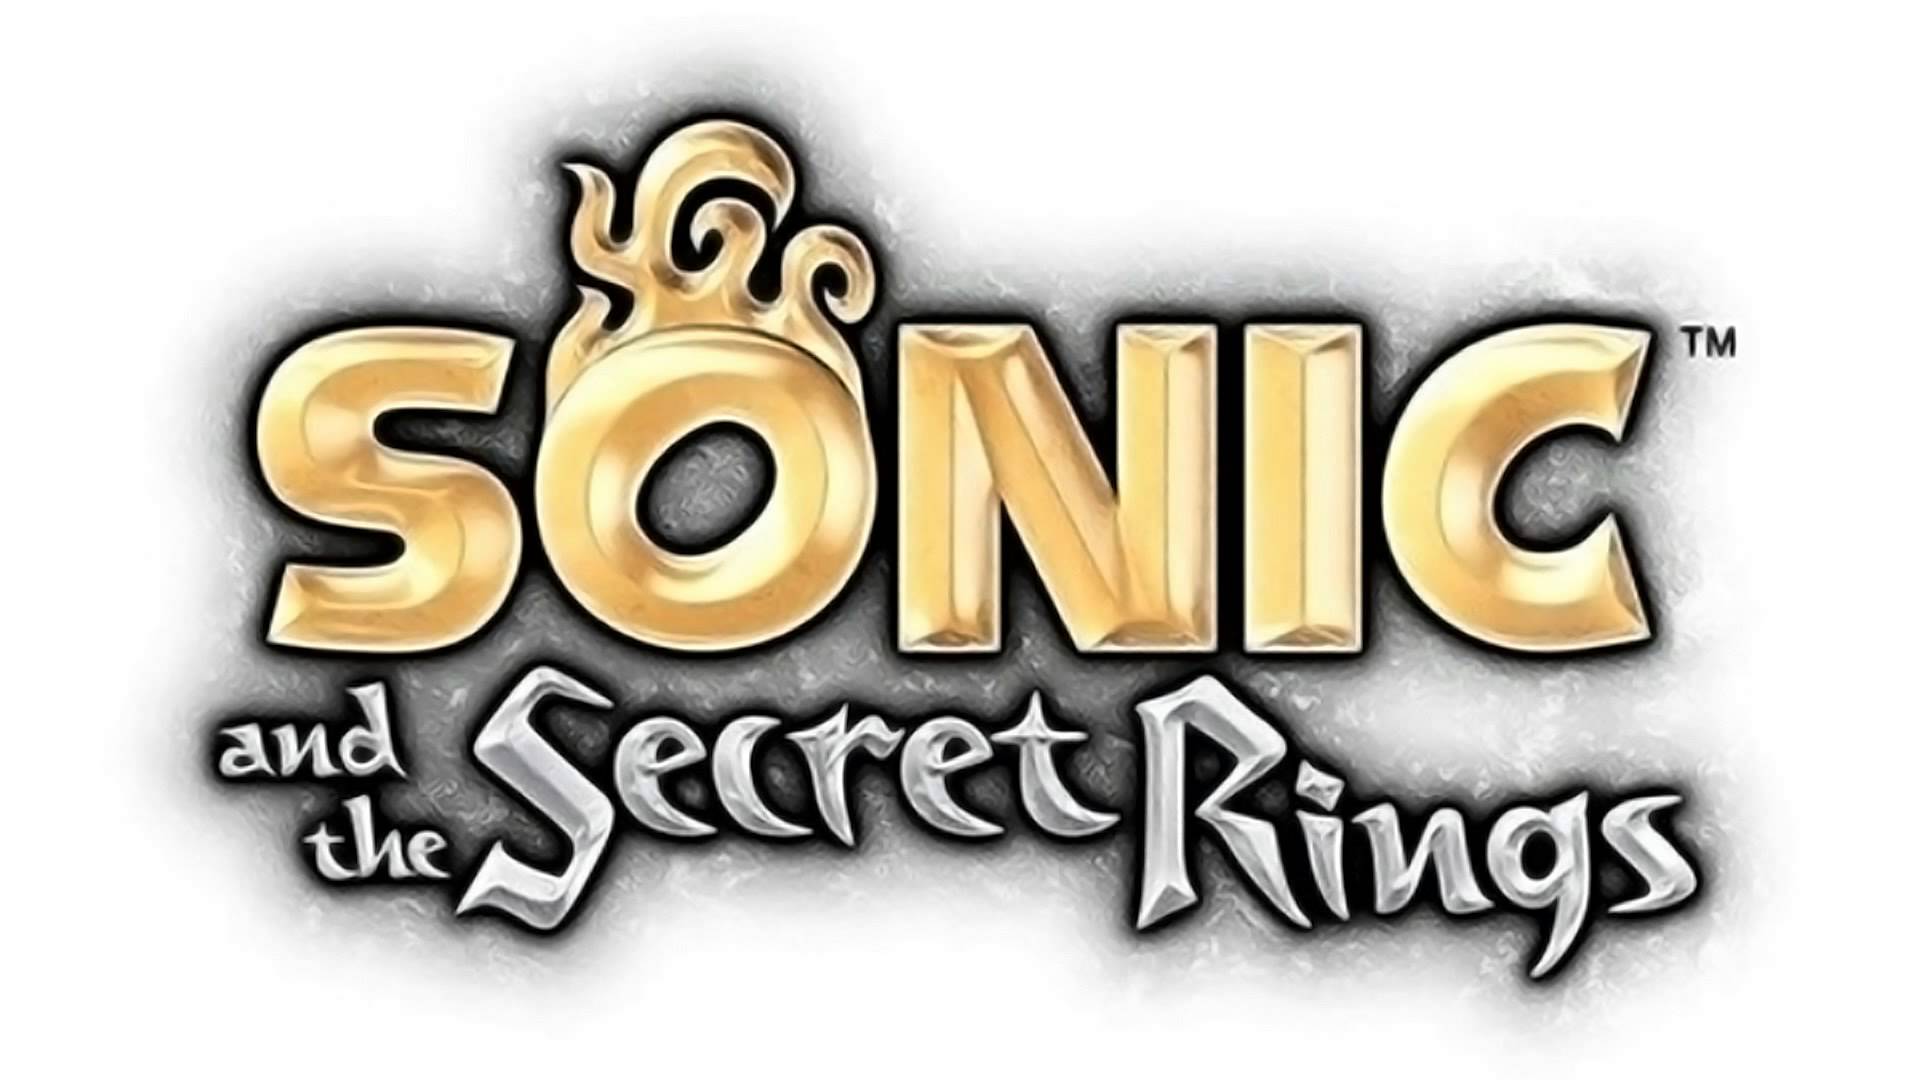 Adventures Of Sonic The Hedgehog, Sonic and the Secret Rings